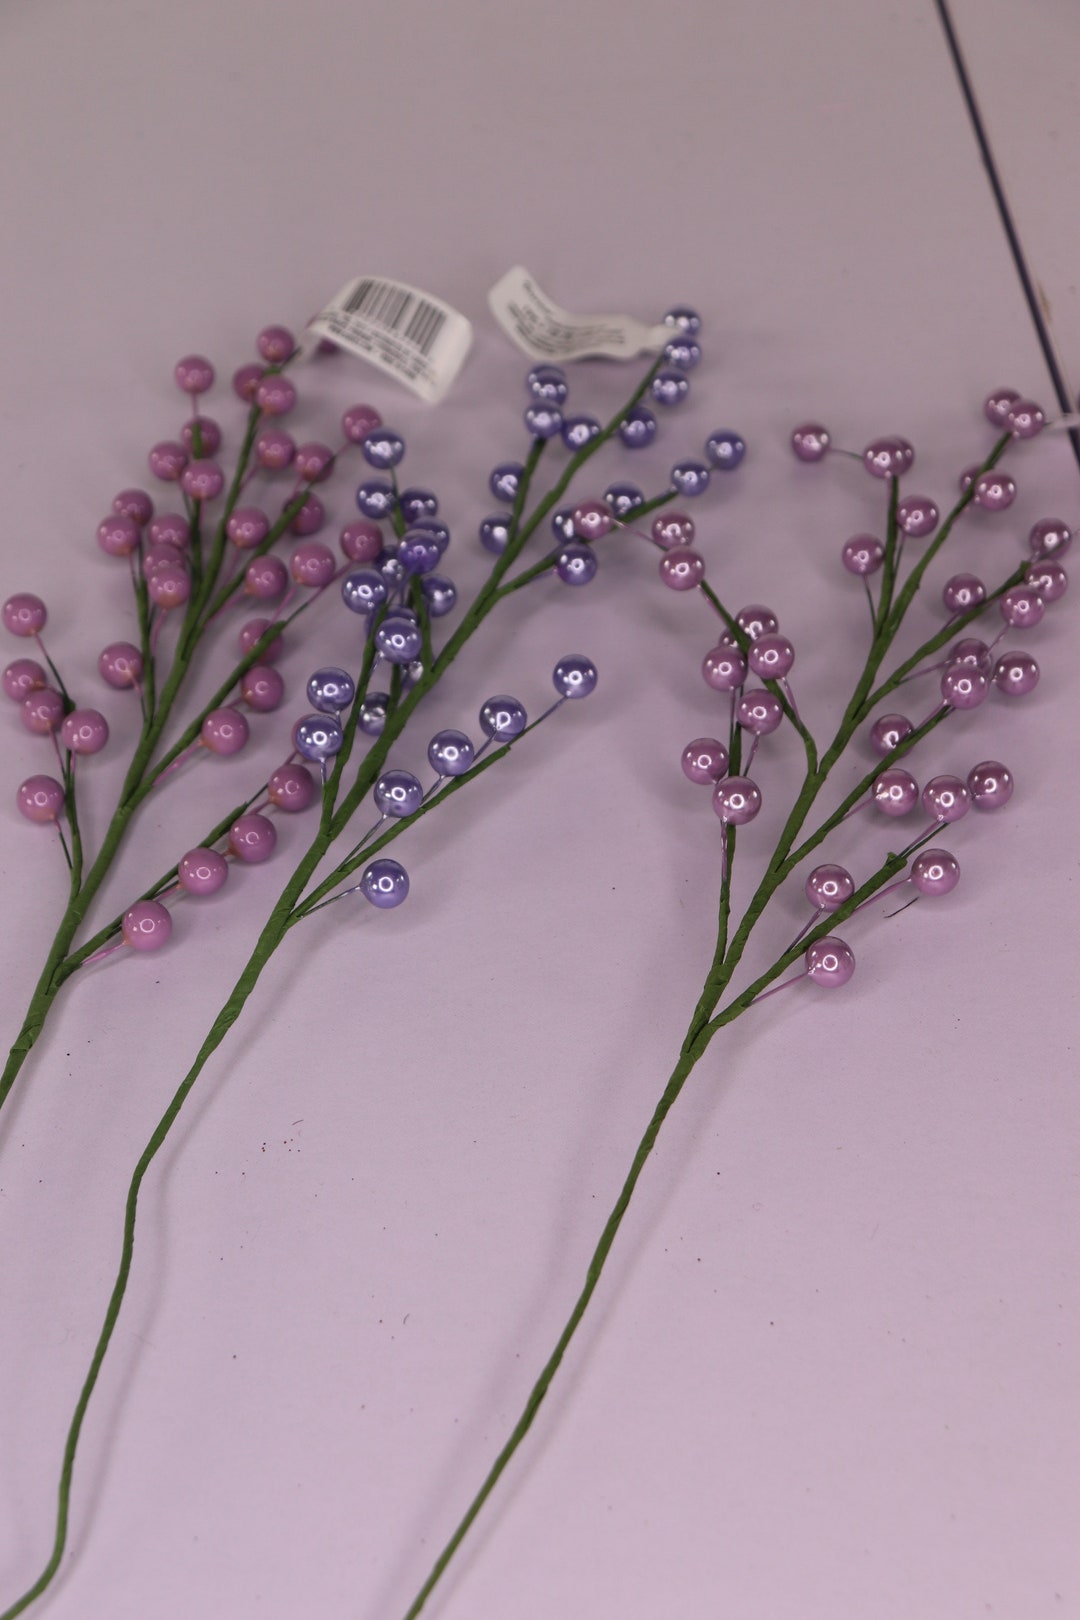 Stattice Bush Mini 15 X 5 Stems, Floral Stems for Wreath and Craft